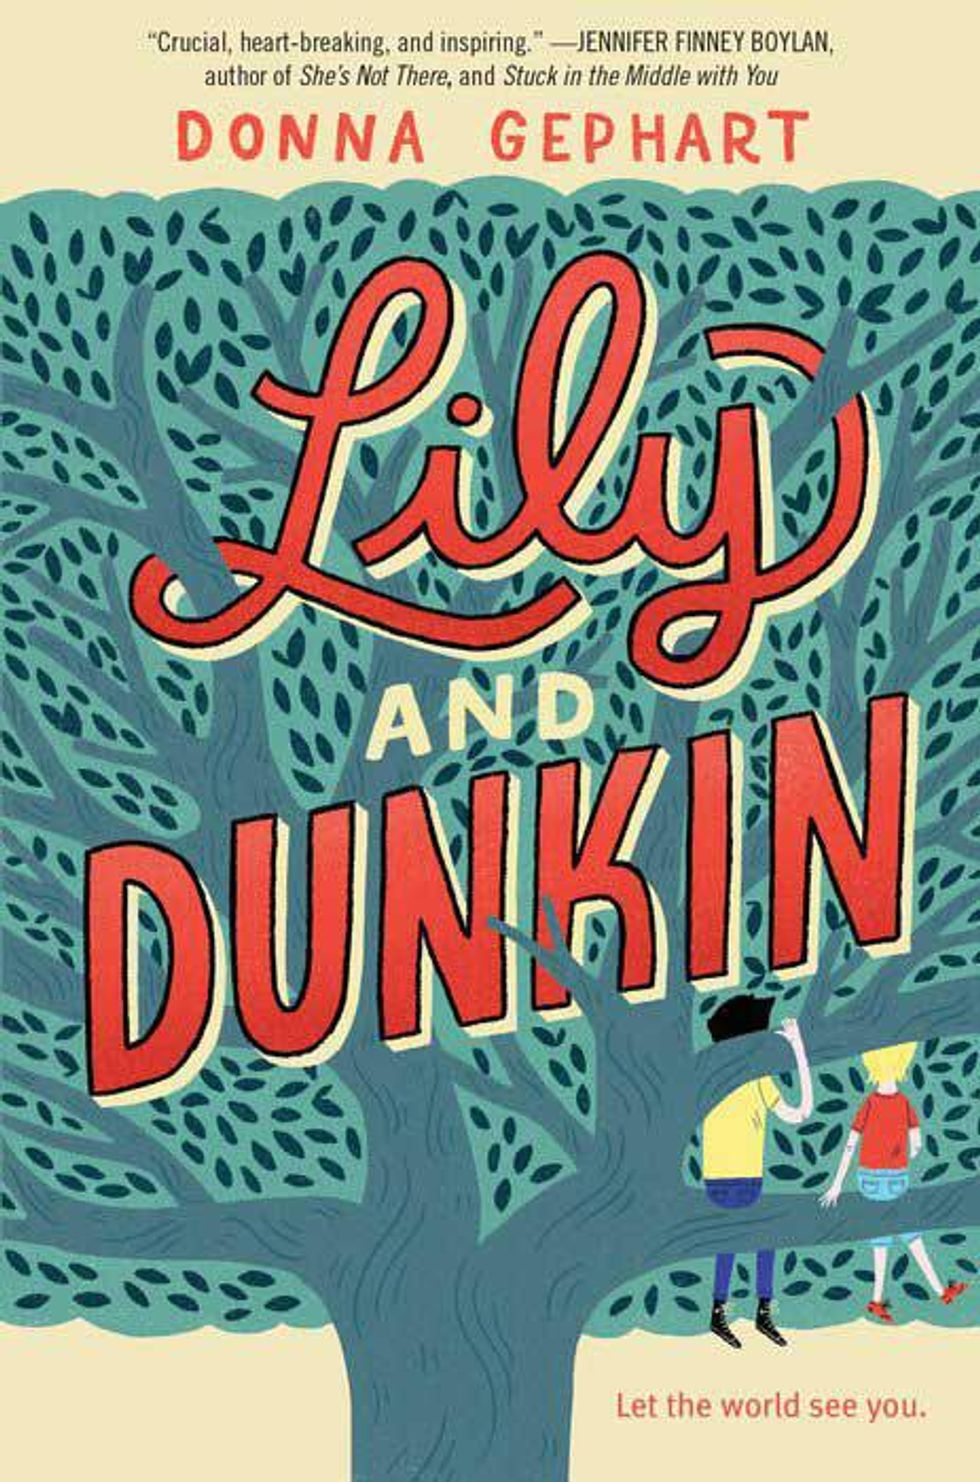 This is the cover of the book 'Lily and Dunkin'.